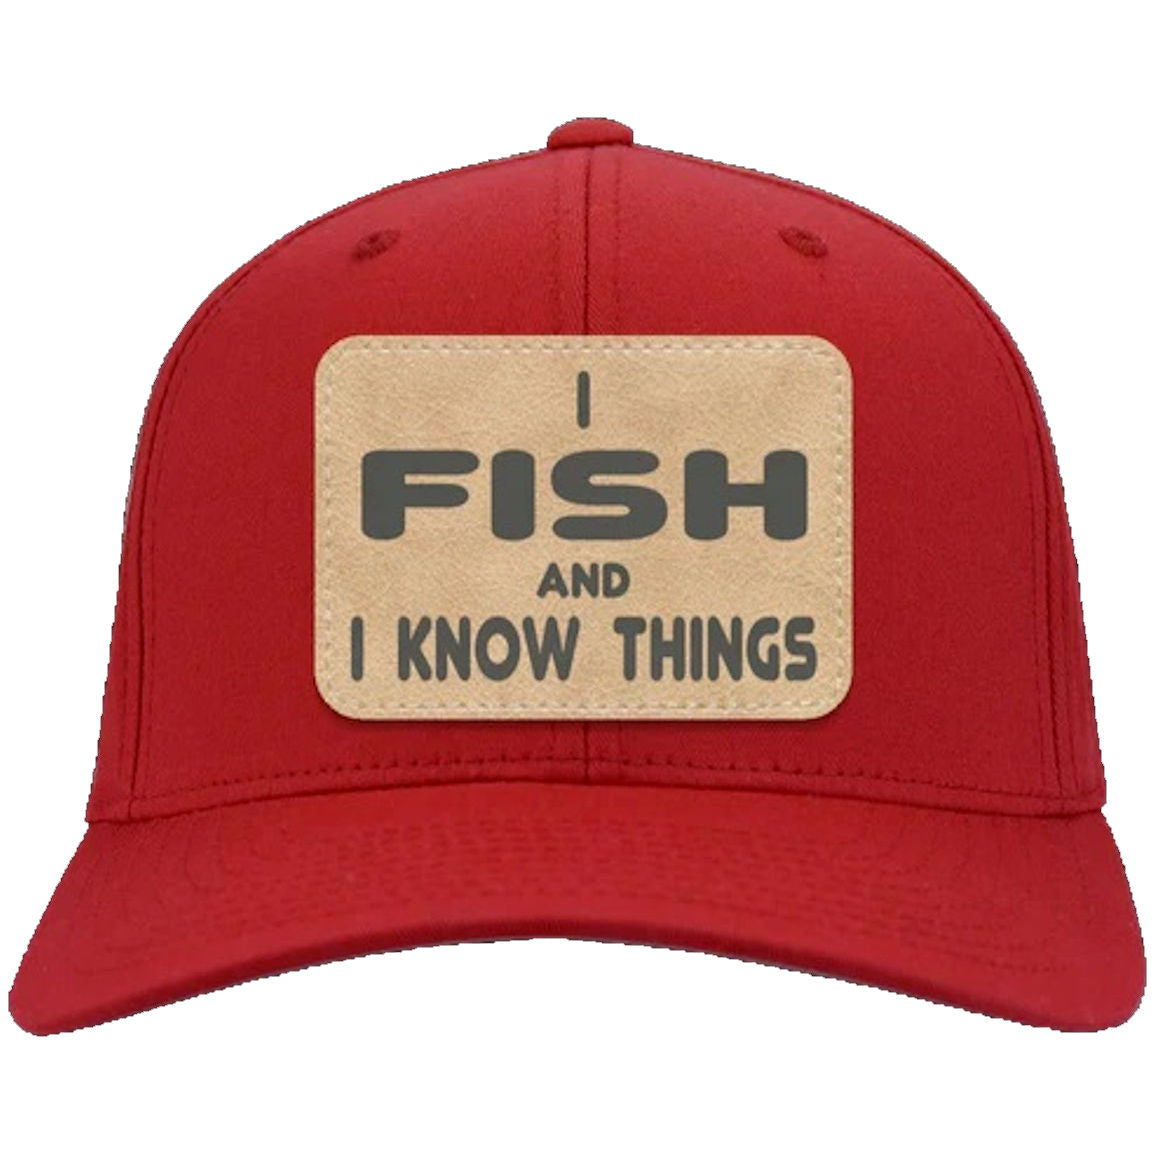 I Fish and Know Things Twill Cap red